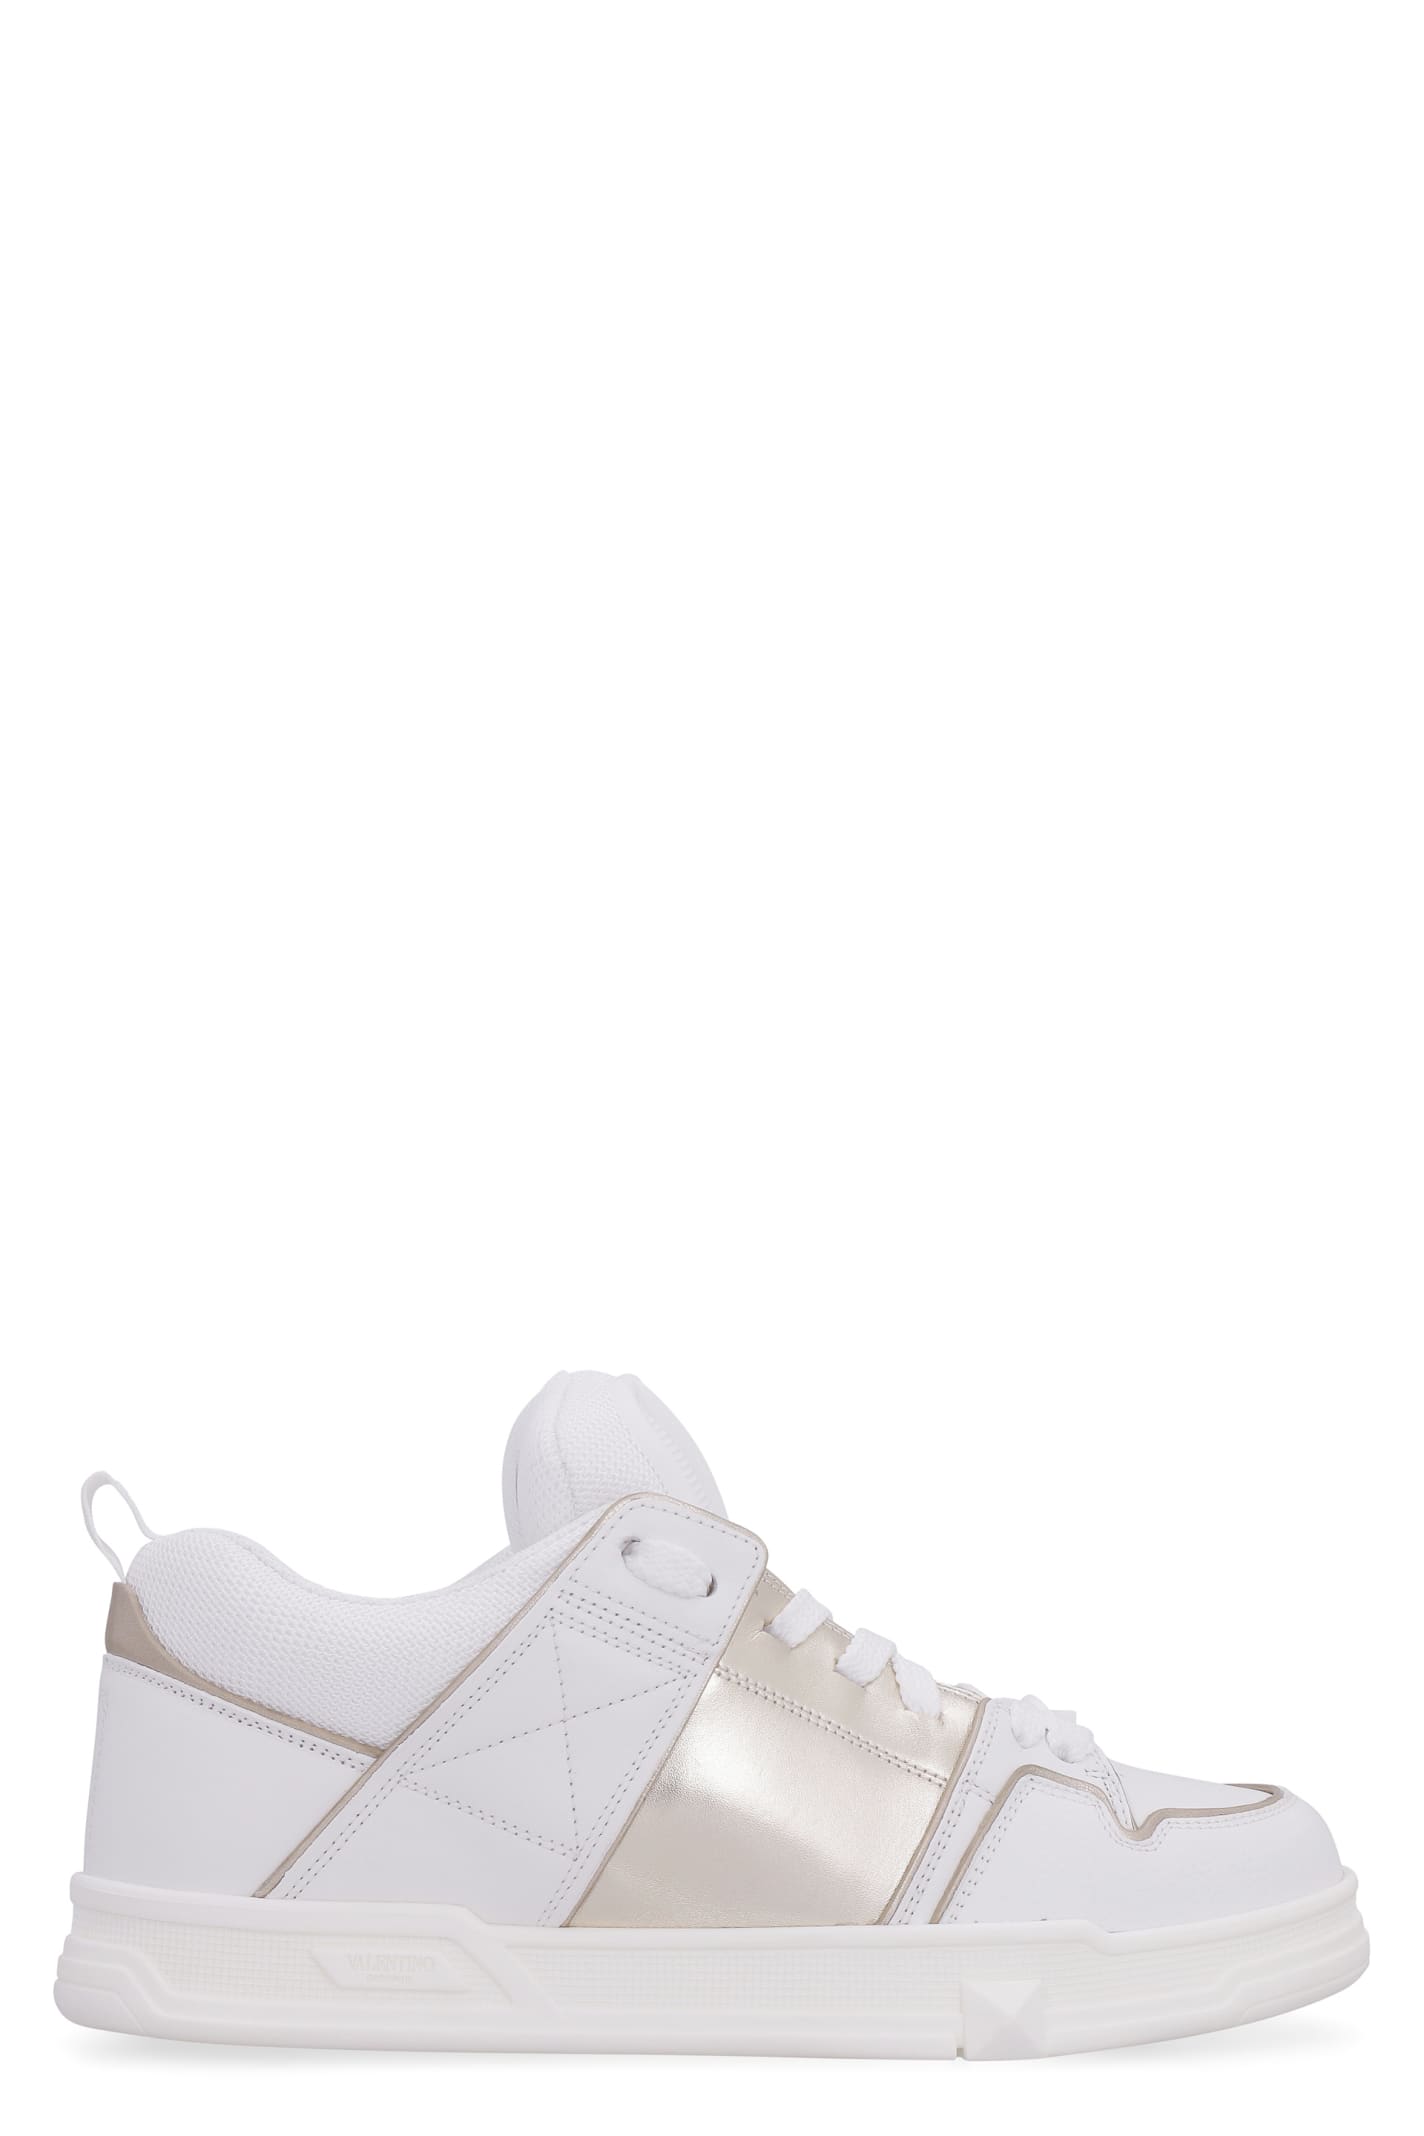 Valentino Open Skate Leather Low-top Sneakers